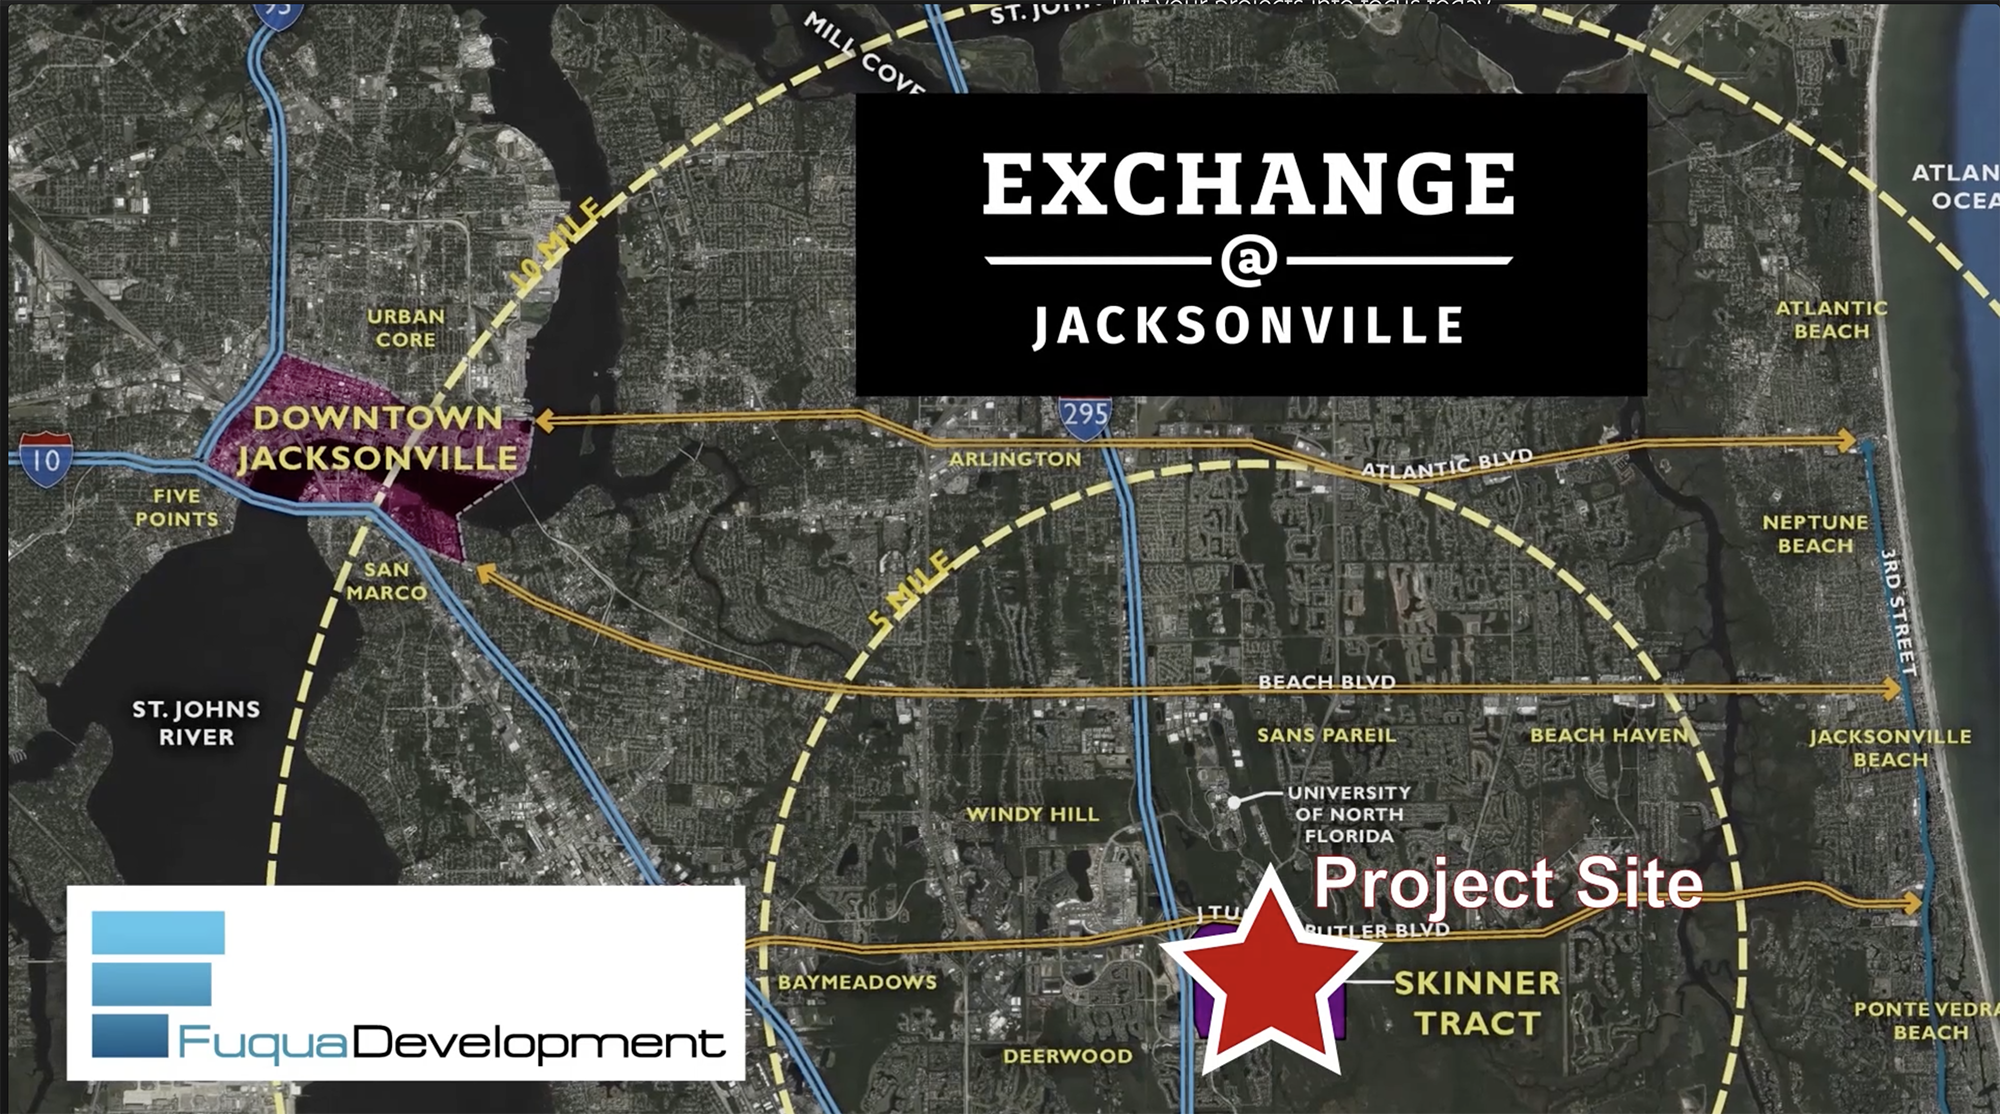 The Exchange is planned at at southeast Butler Boulevard and Interstate 295.